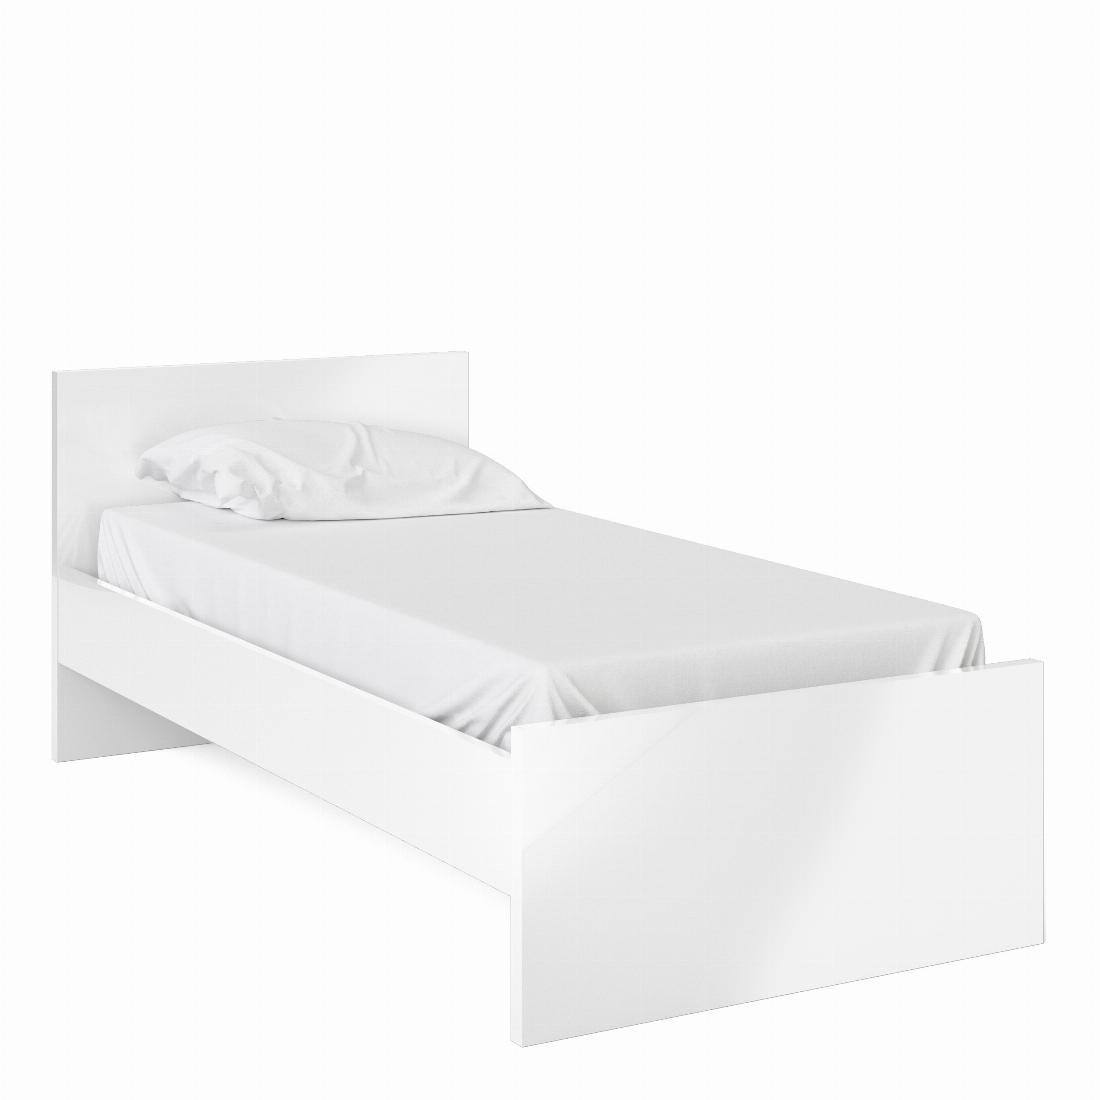 Naia Single Bed 3ft (90 x 190) in White High Gloss